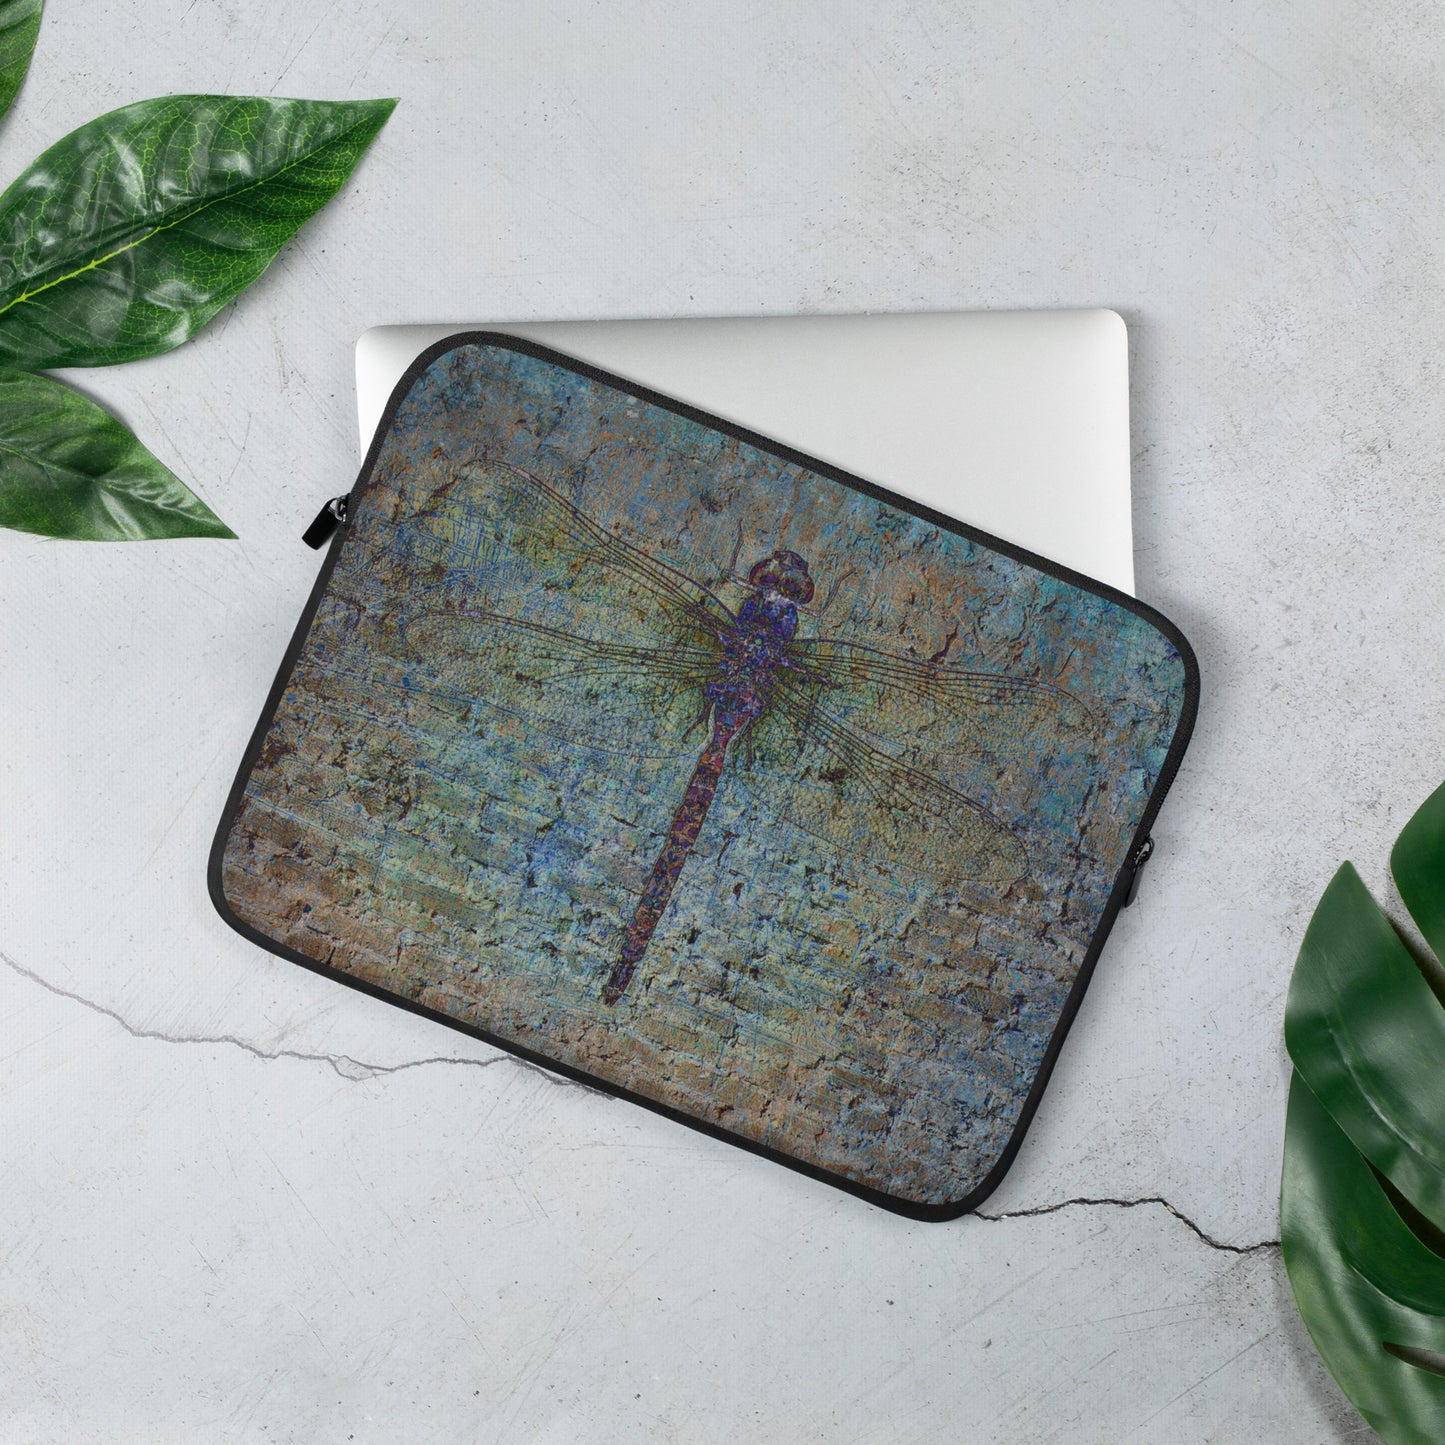 Dragonfly on Distressed Multicolor Brick Wall Laptop Sleeve - Mac Book sleeve - Surface Sleeve 13 inches